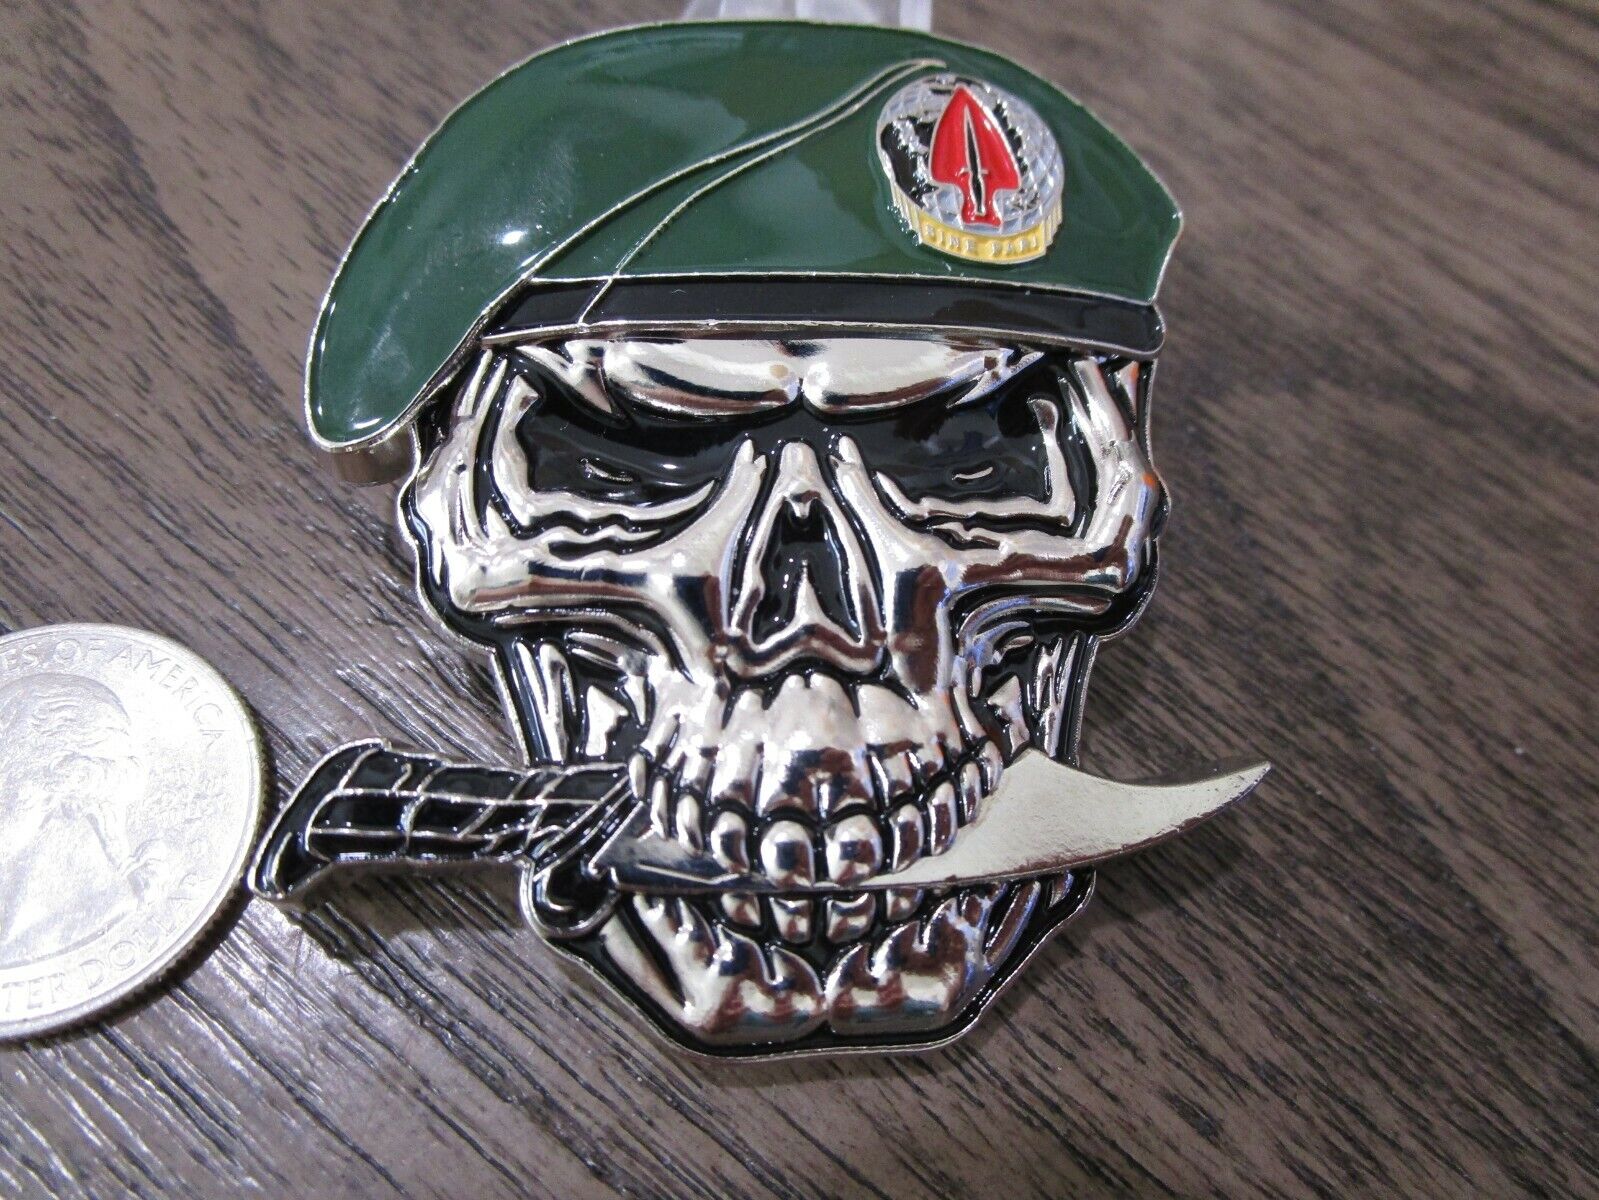  1st Special Forces Delta Force JSOC SFOD-D We Don't Exist Skull Challenge Coin